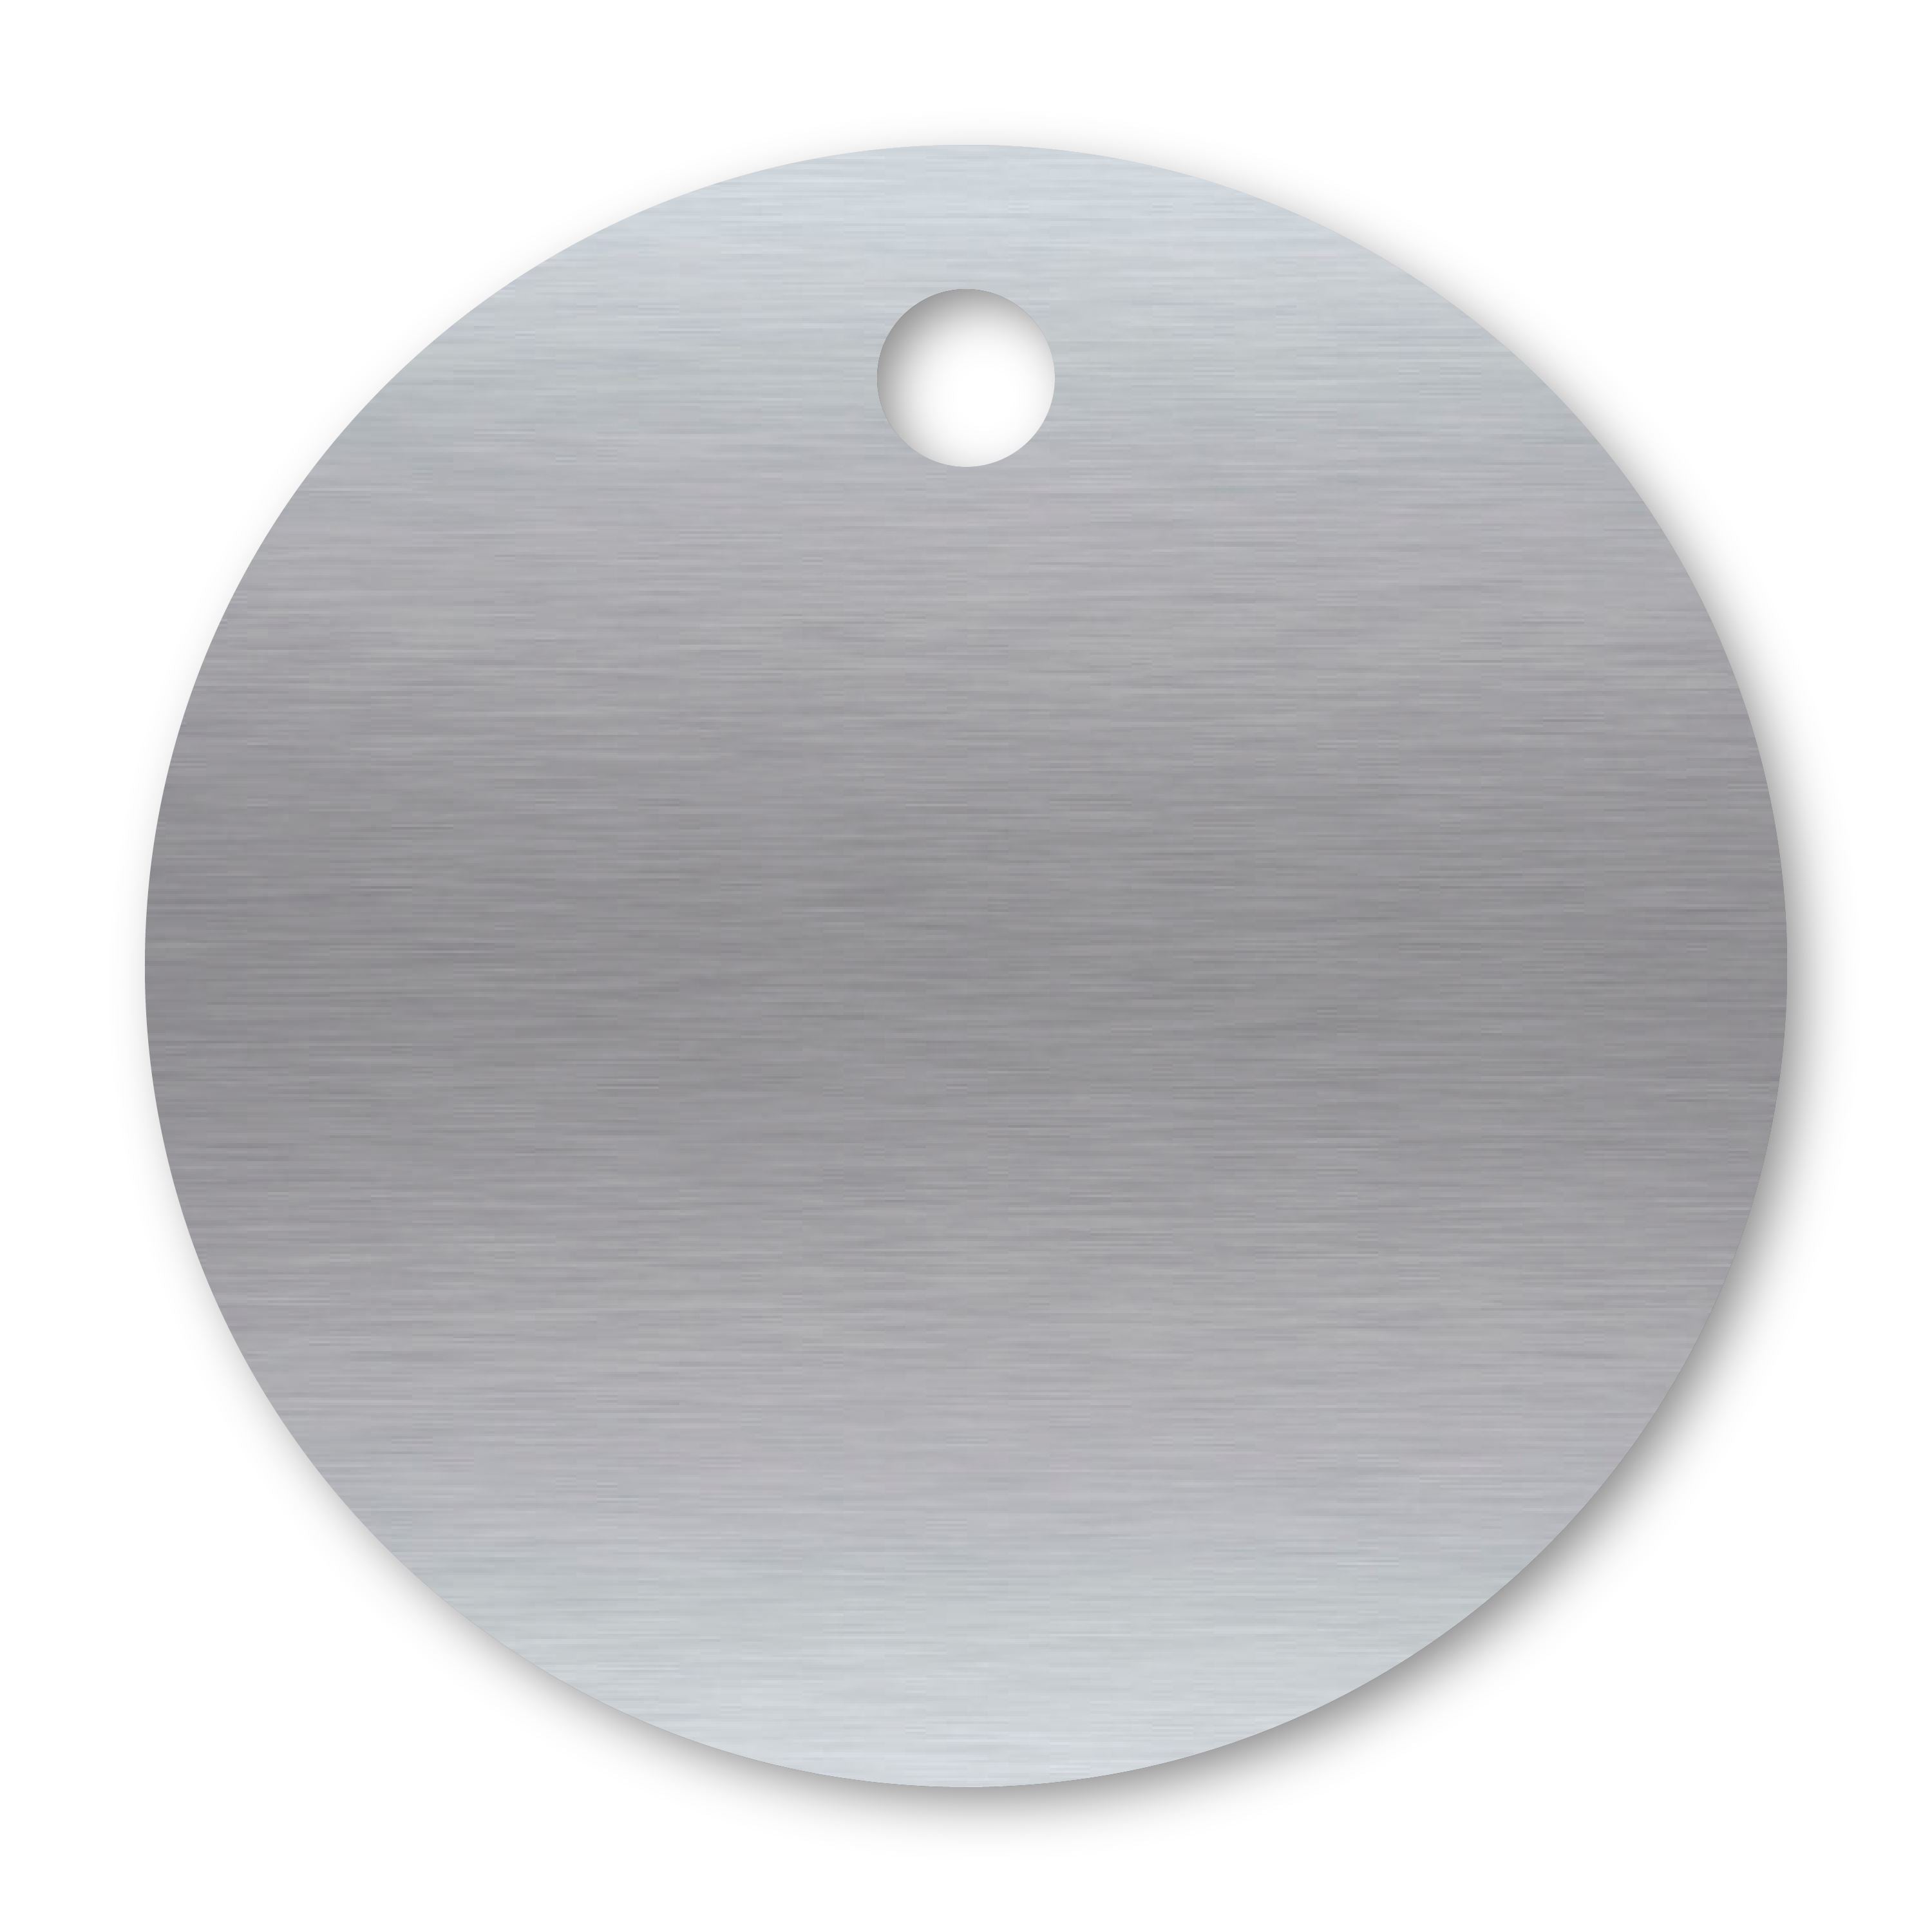 Anodized Aluminum Round Tags, 1-1/4" with 1/8" Hole, Laser Engraved Metal Tags Craftworks NW Silver 